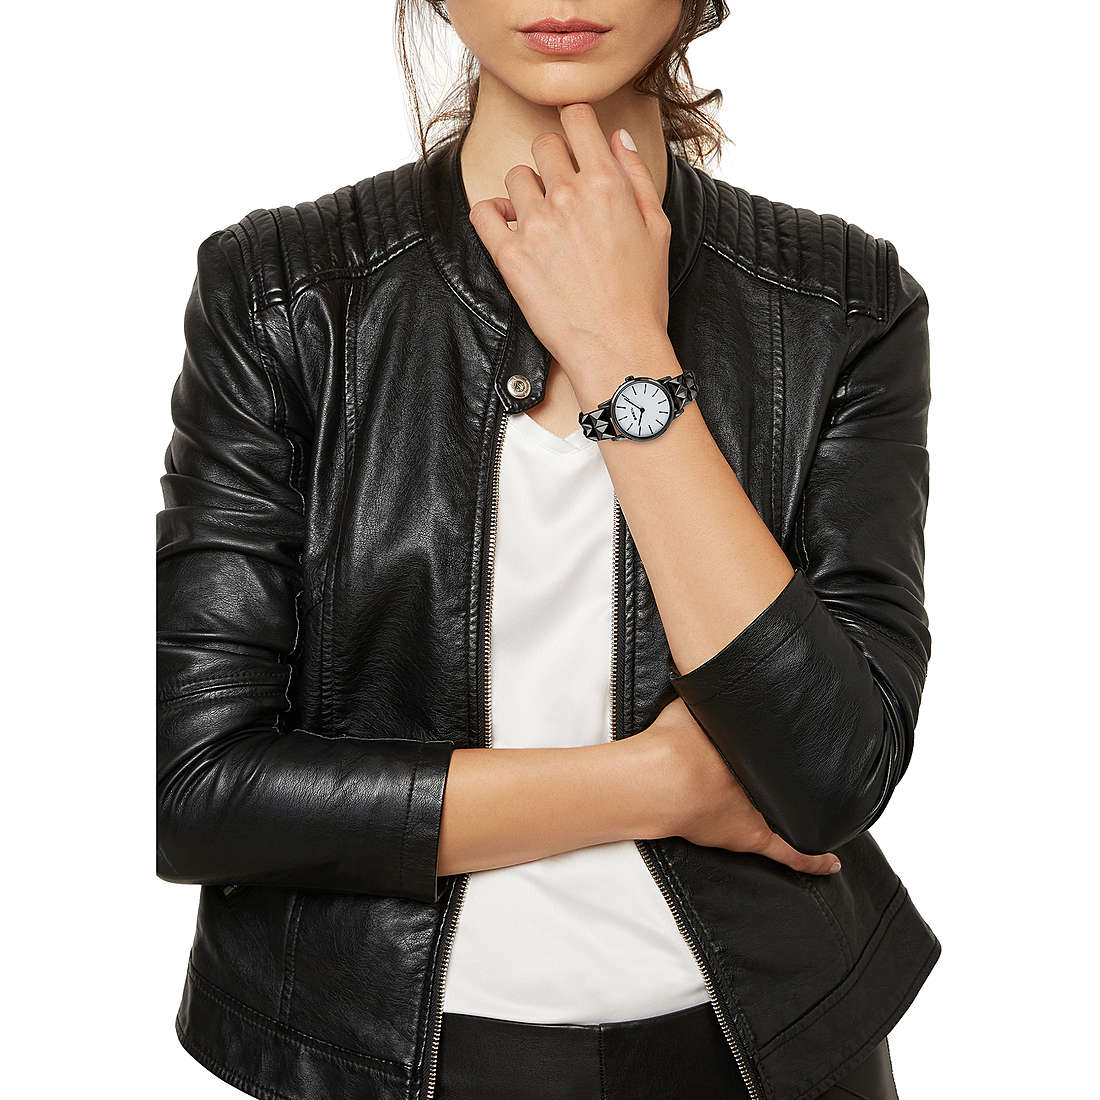 Breil only time Rockers woman TW1845 wearing